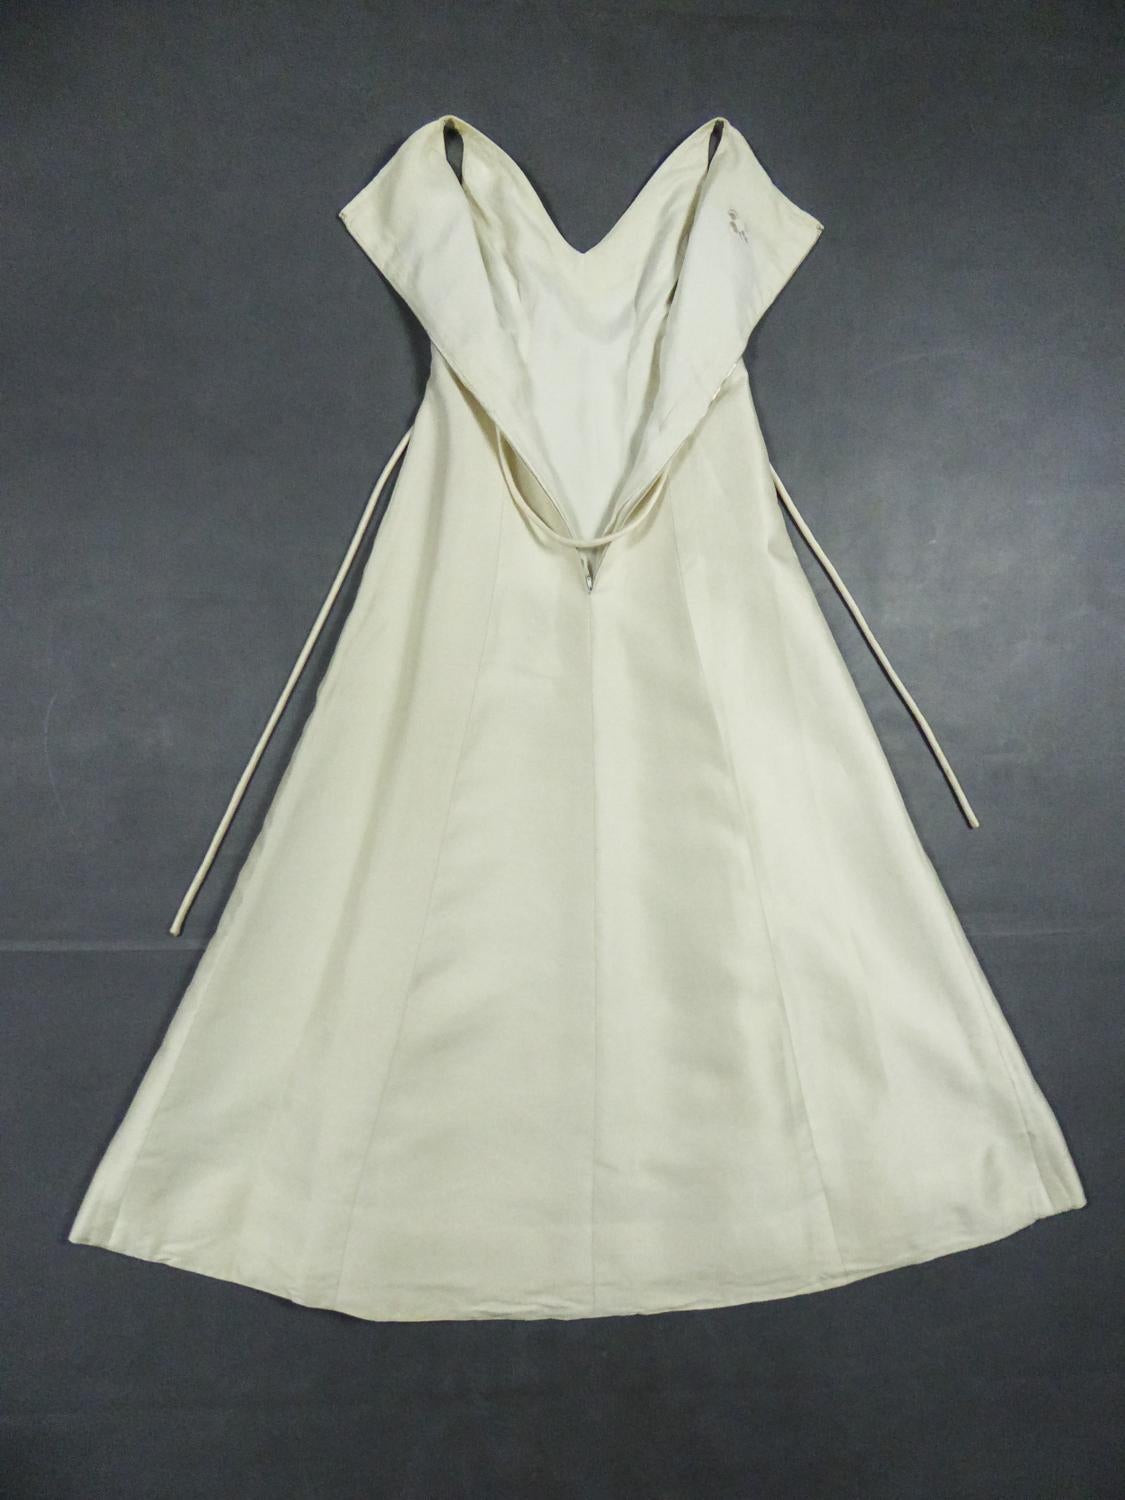 Circa 1965
British Colony of Hong Kong

Elegant wedding dress in off-white rigid silk gazar from the 1960s. Long dress with high waist fitted on the bust and sleeveless. V-shaped neckline and large box pleats at the front to give full sweep to the